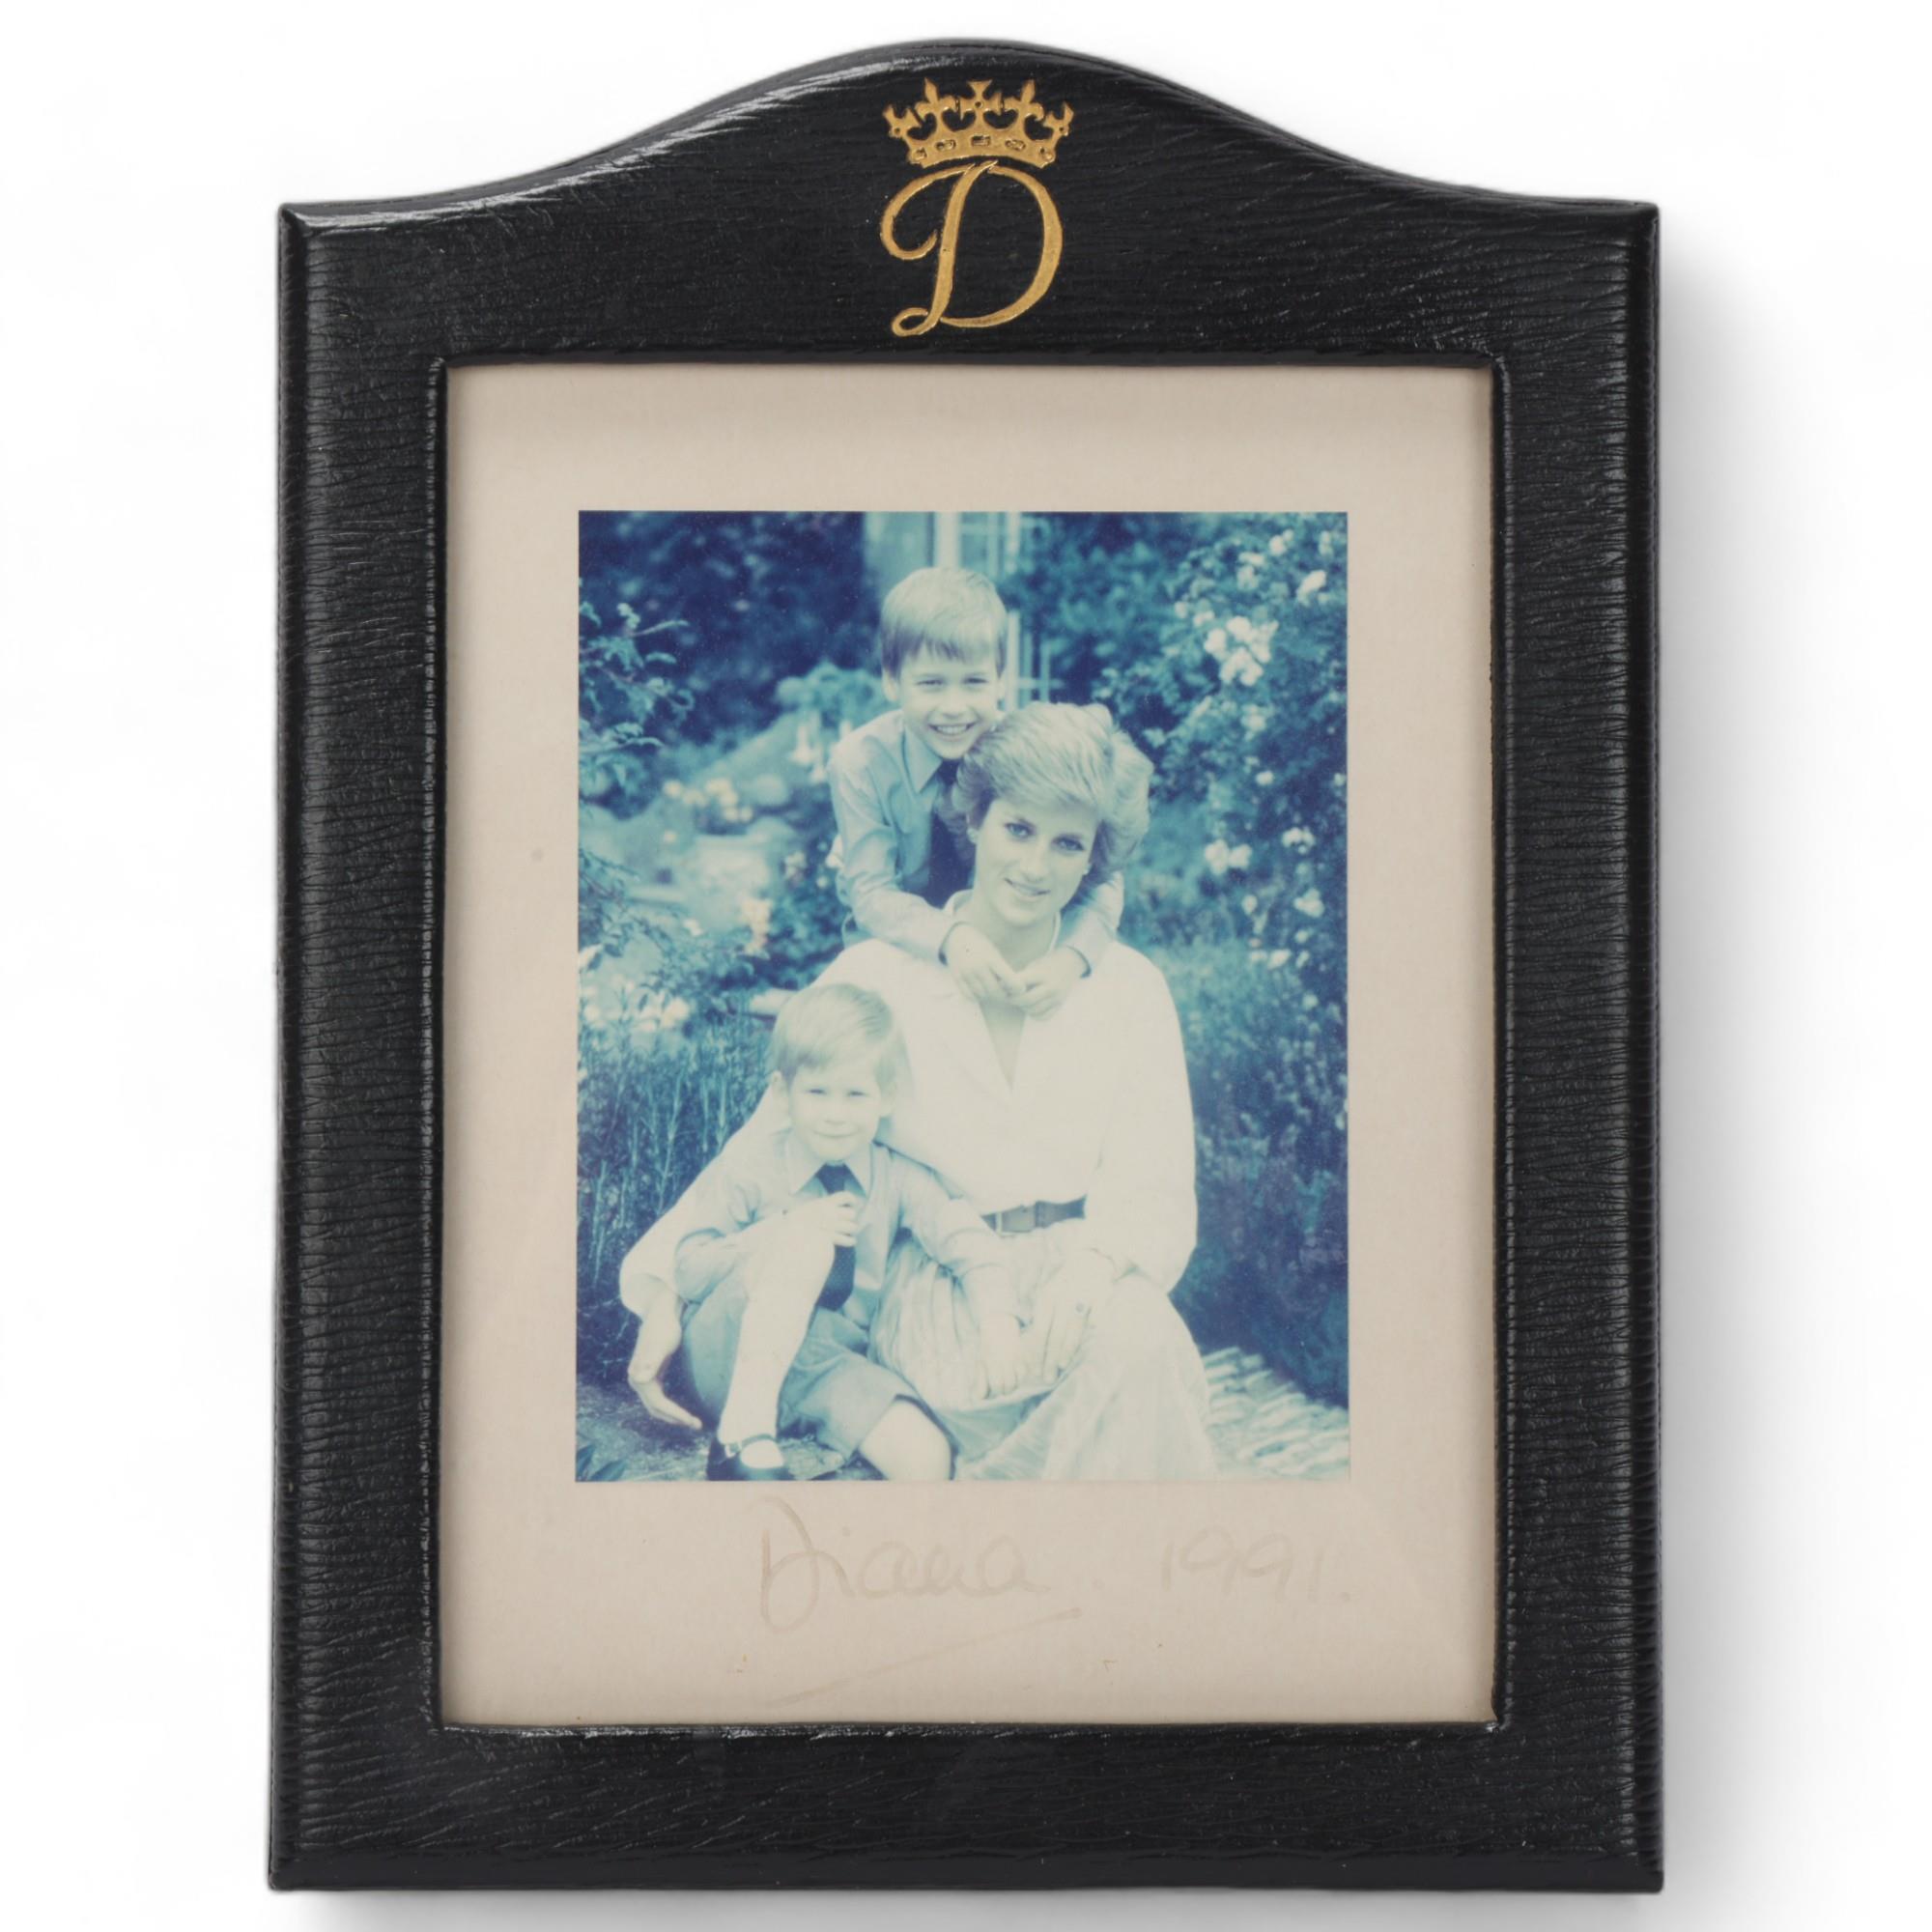 Diana, Princess of Wales, photograph portrait of Diana with Princes William and Harry, signed in pen